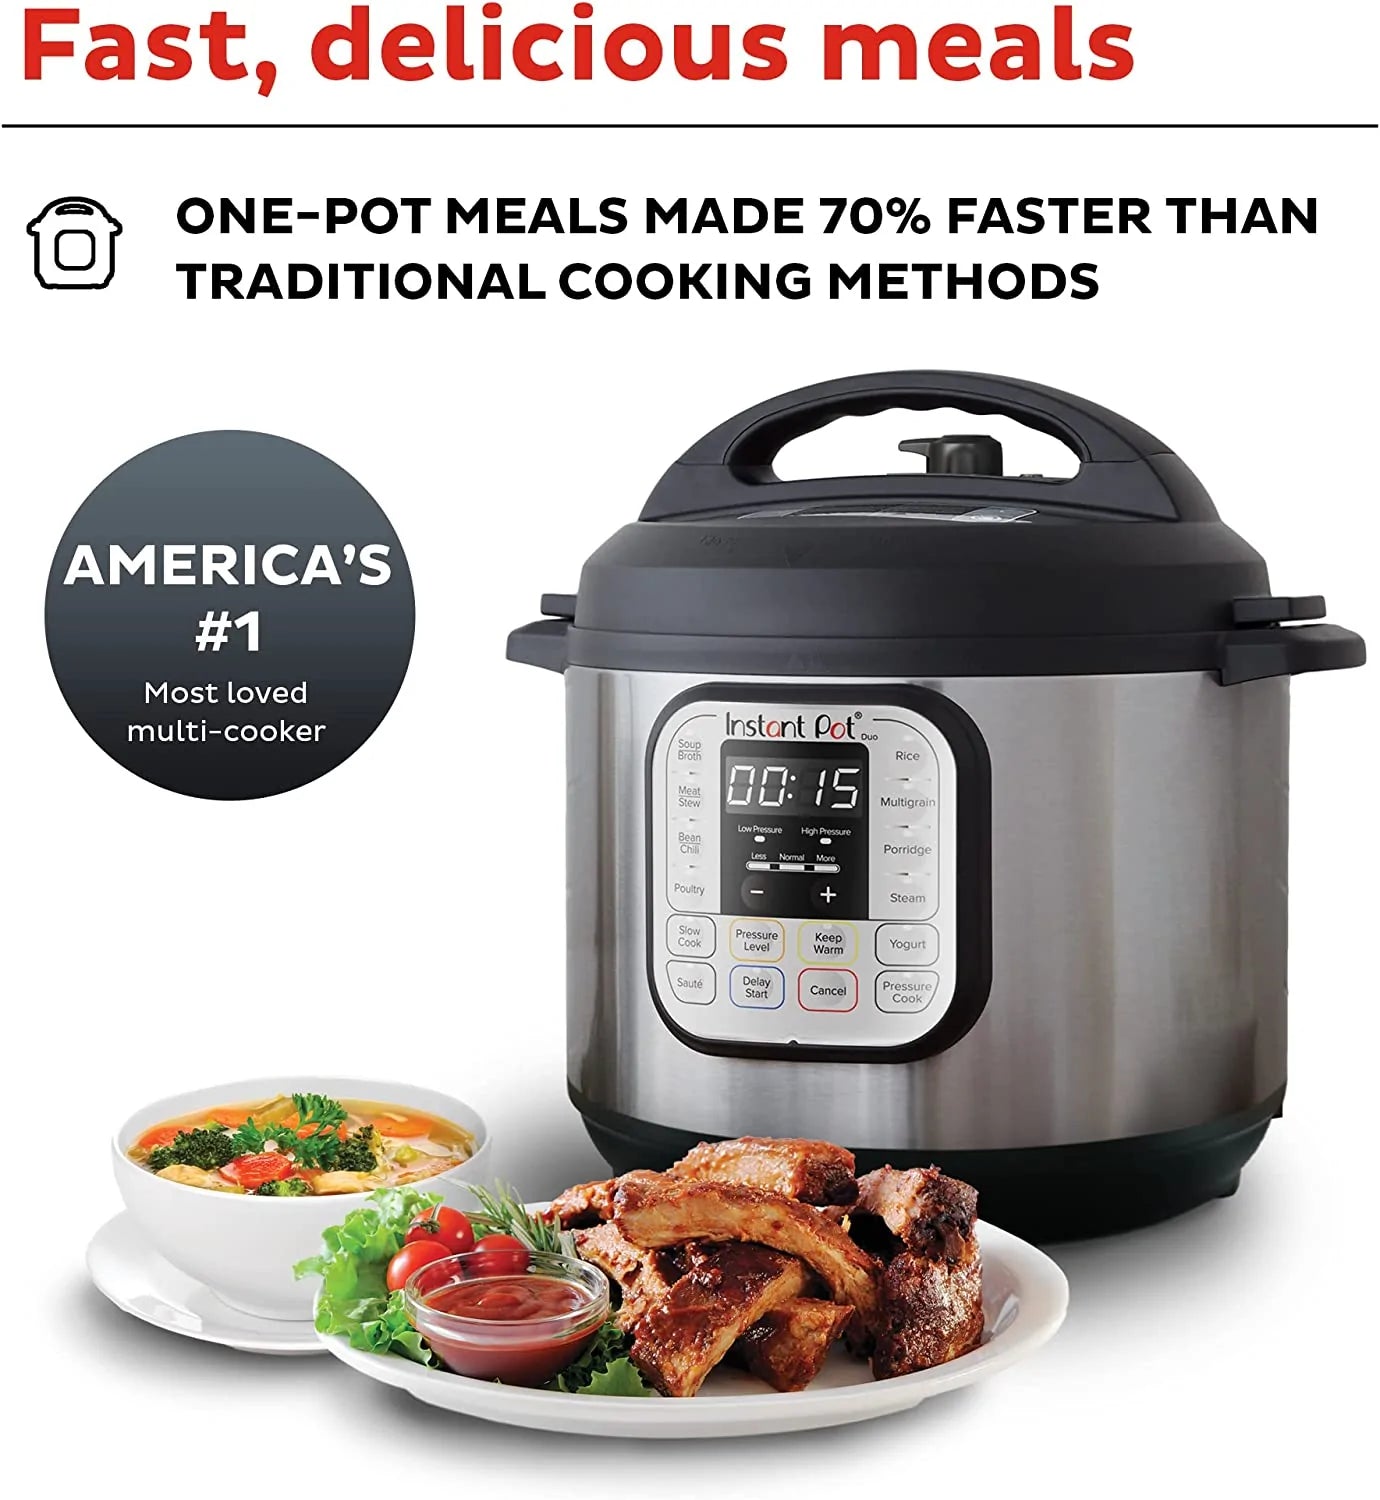 Instant Pot DUO 80 7-in-1 Electric Pressure Cooker 8 Qt - Pre Owned